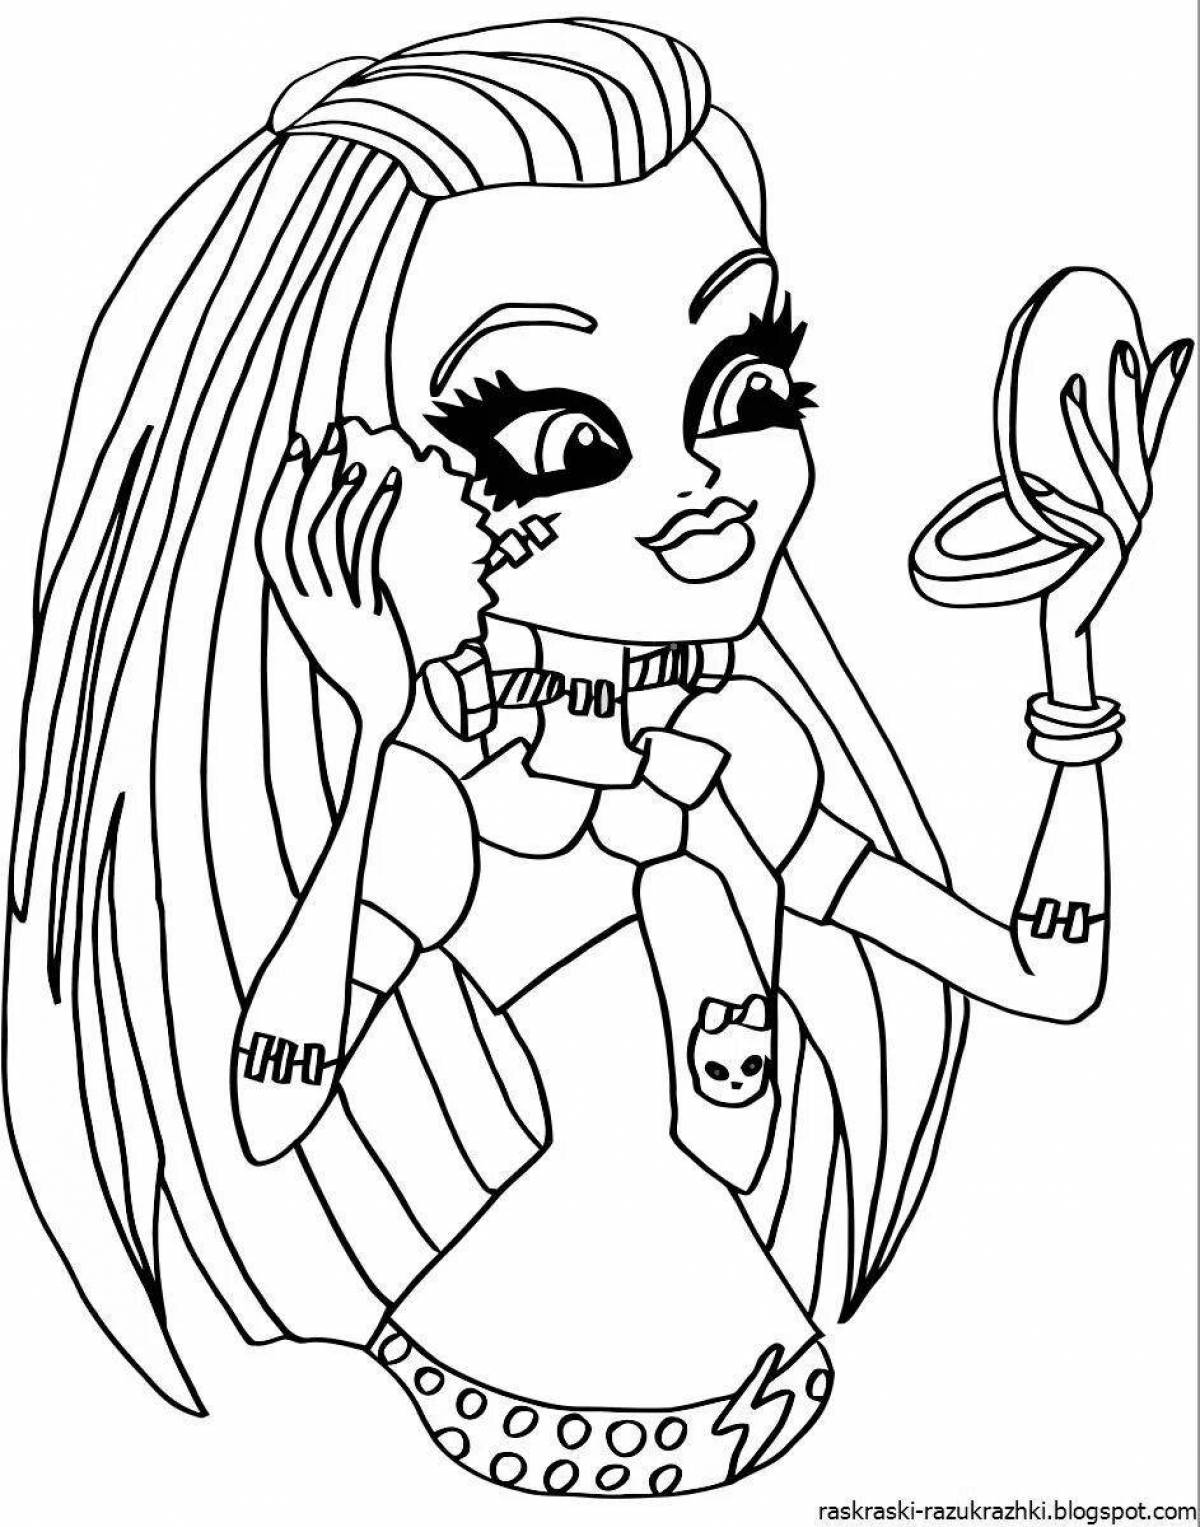 Adorable monster high coloring book for kids